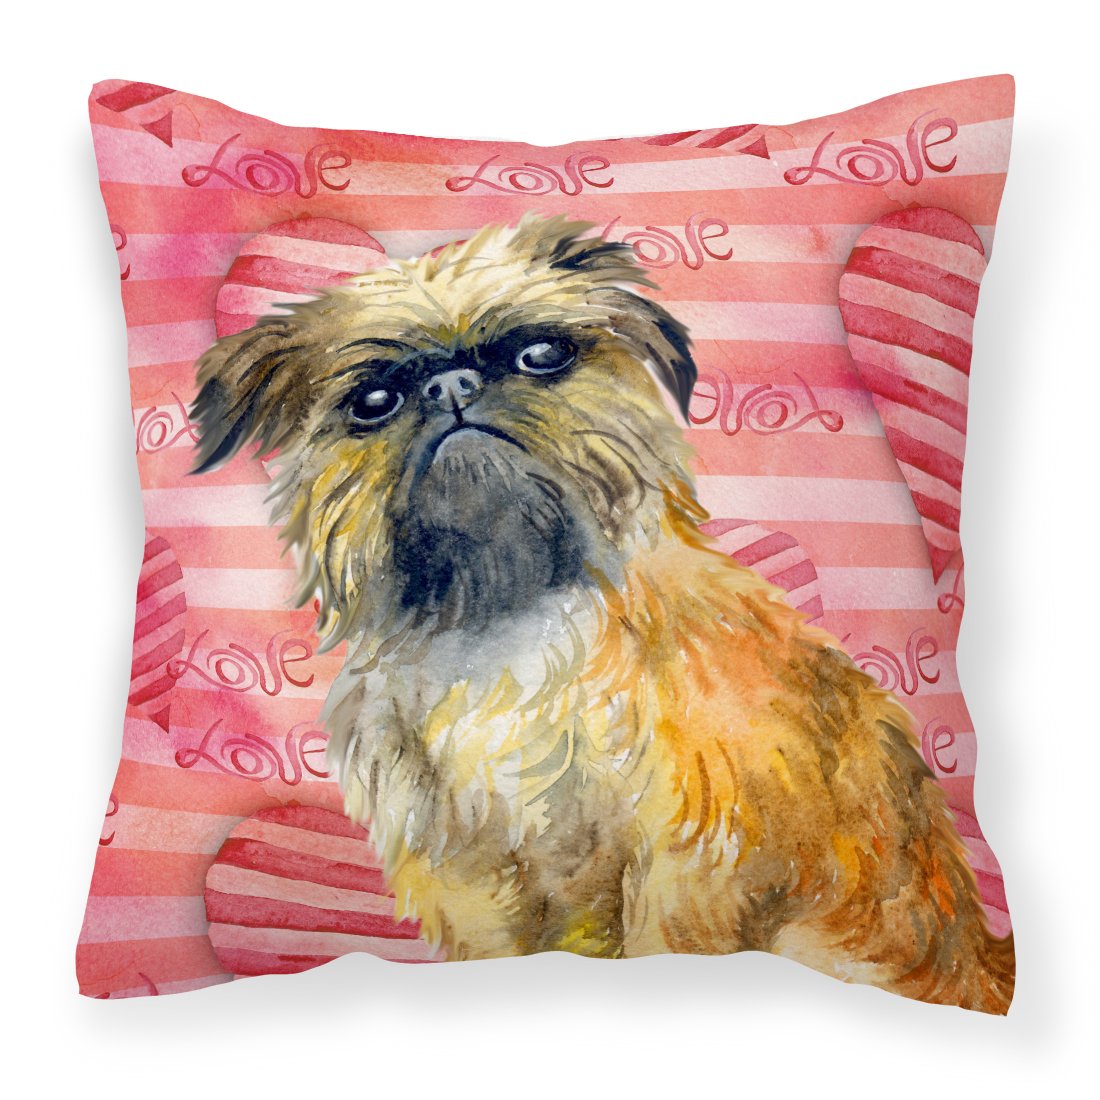 Brussels Griffon Love Fabric Decorative Pillow BB9774PW1818 by Caroline's Treasures